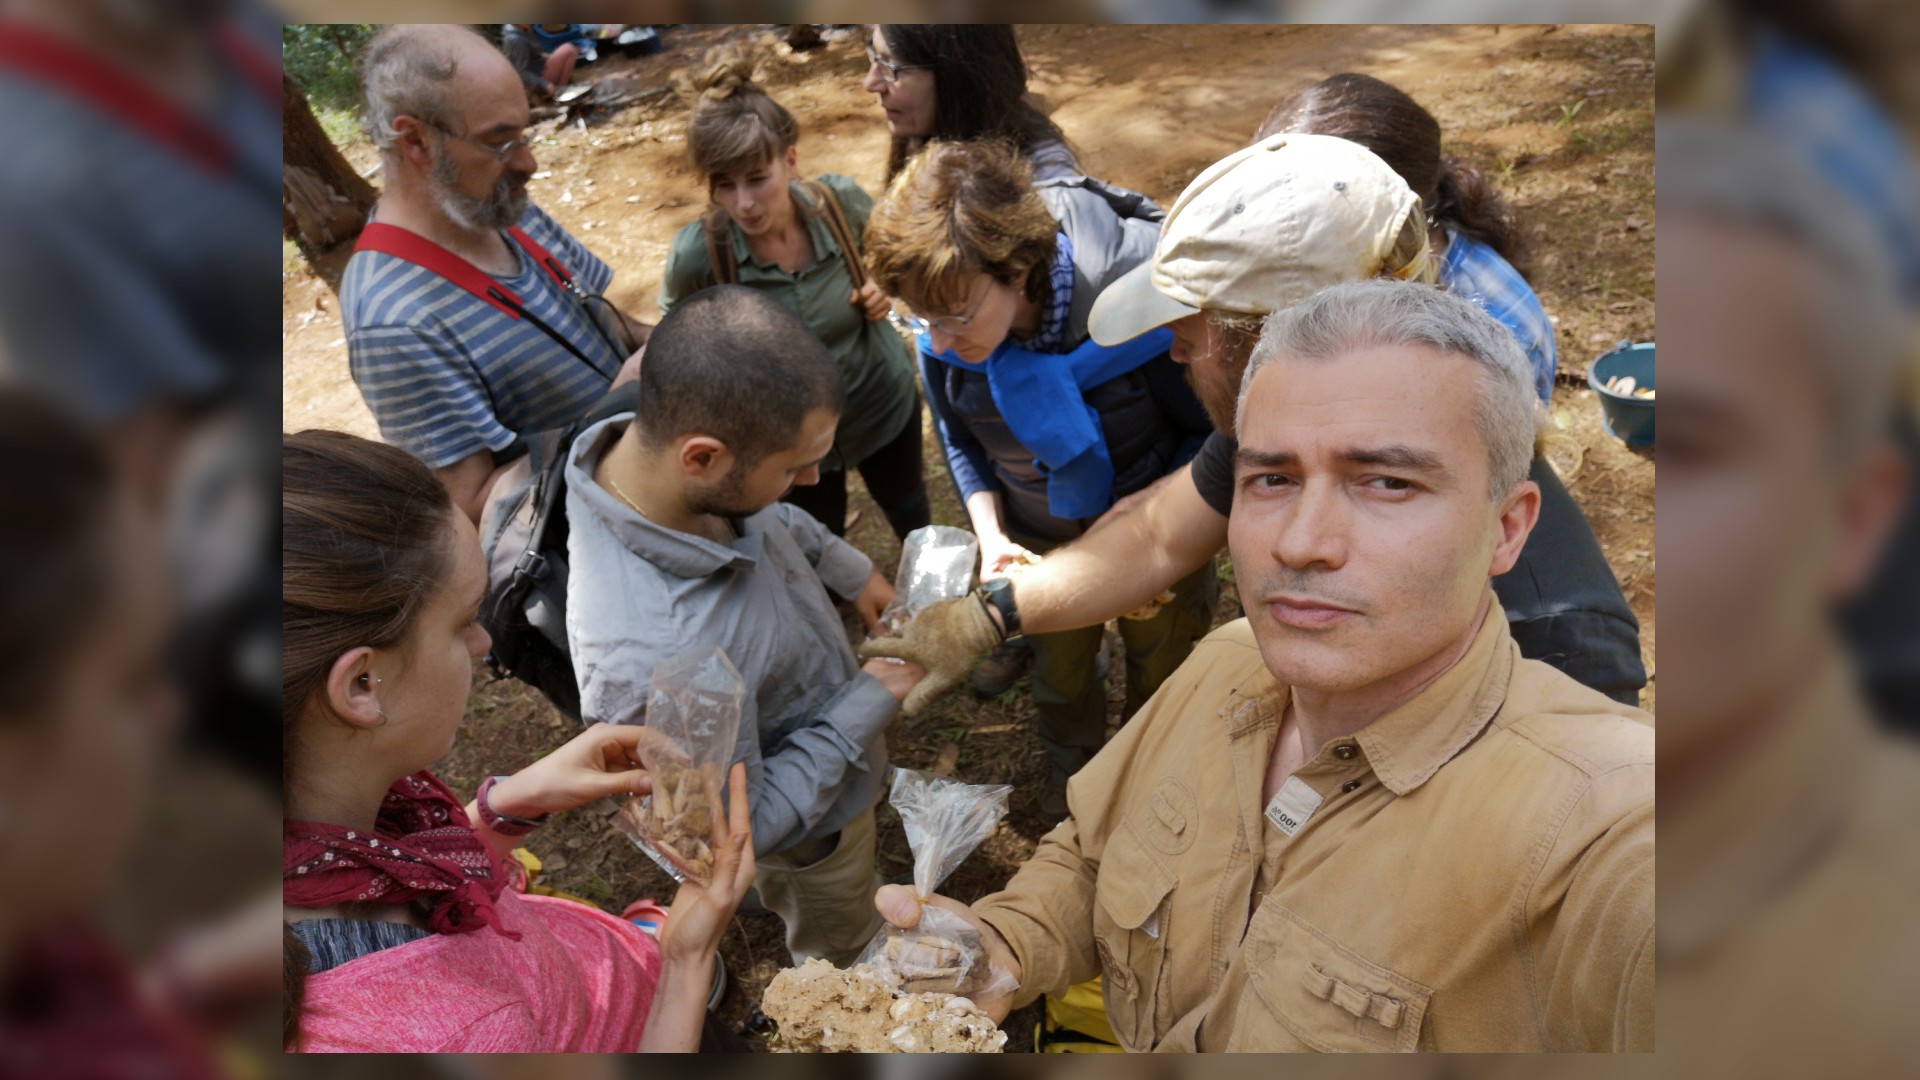 A group of nine researchers in a circle huddled over an interesting find. One man is facing the camera and proudly holding up a bagged artifact.